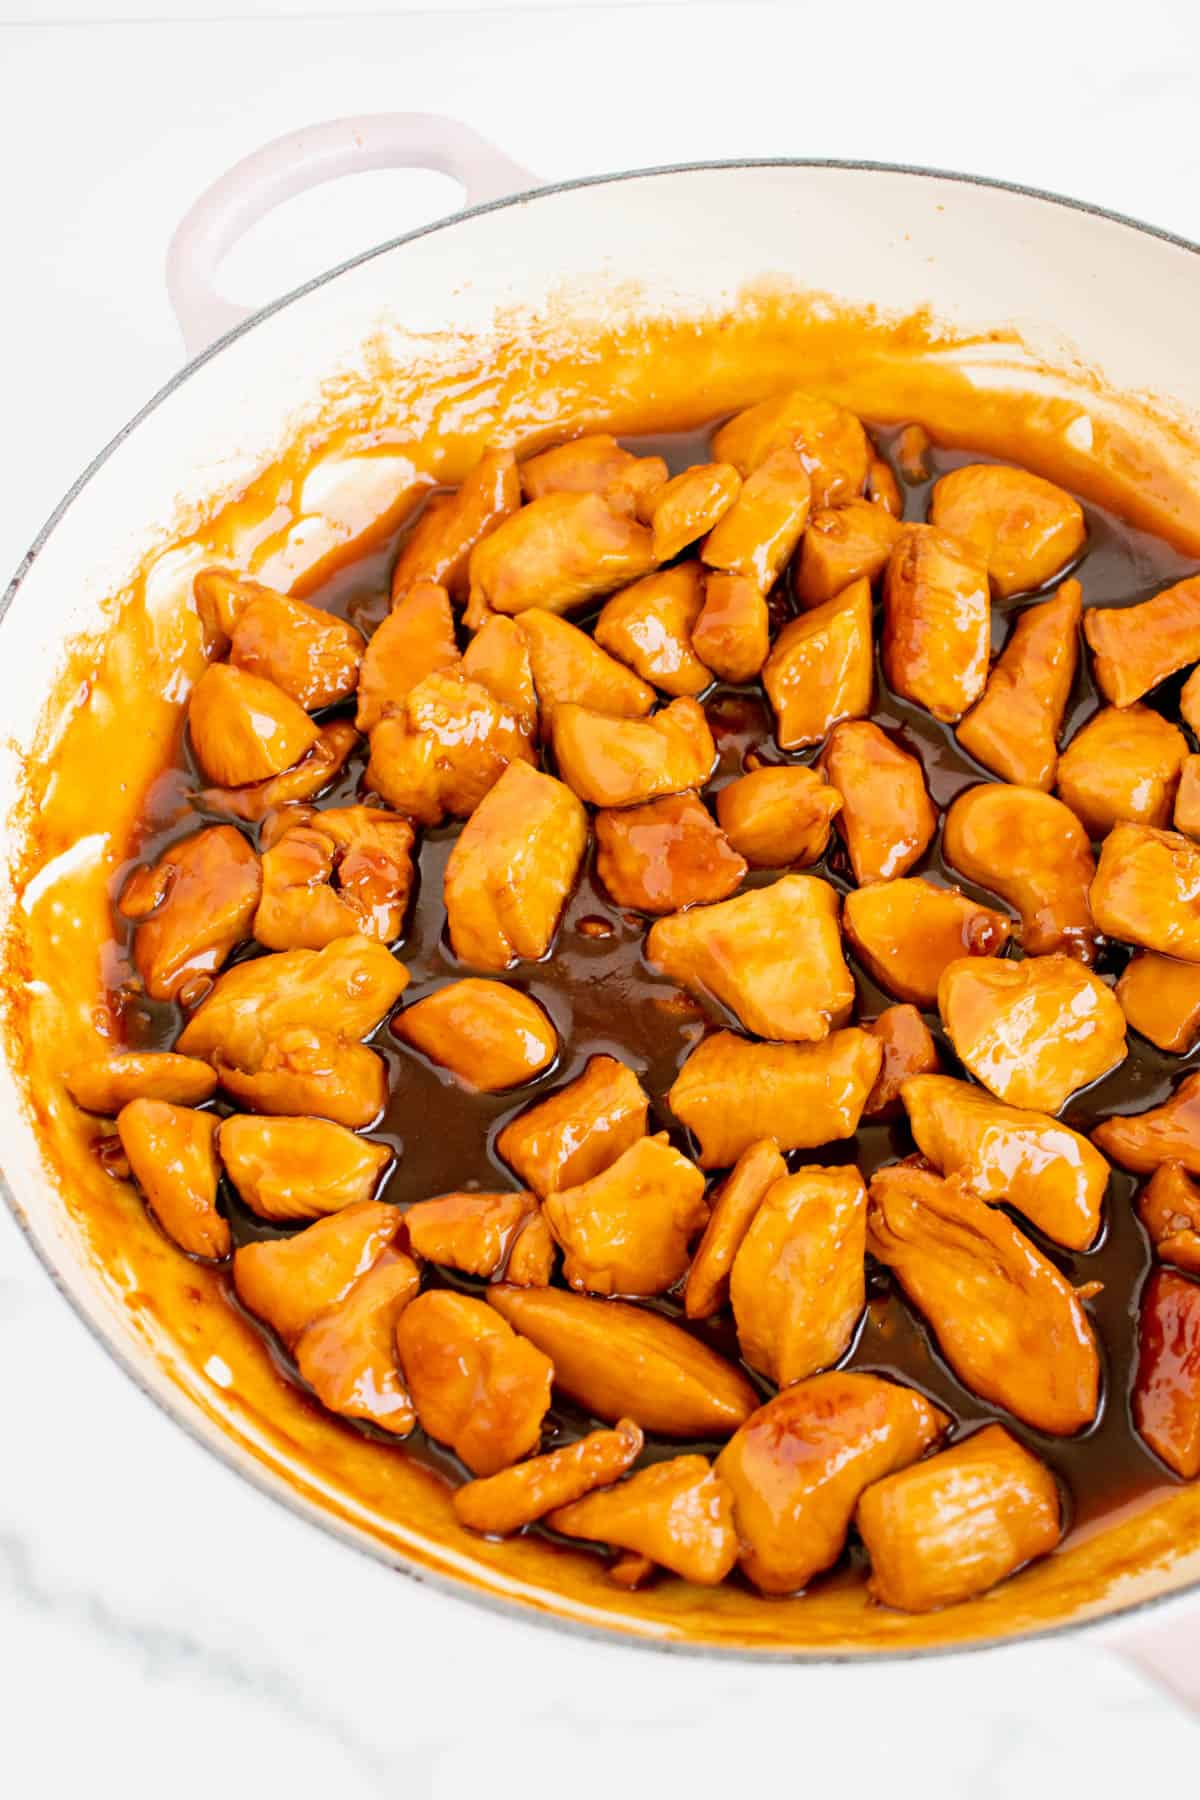 Bite size pieces of chicken breast are cooked in a brown teriyaki sauce